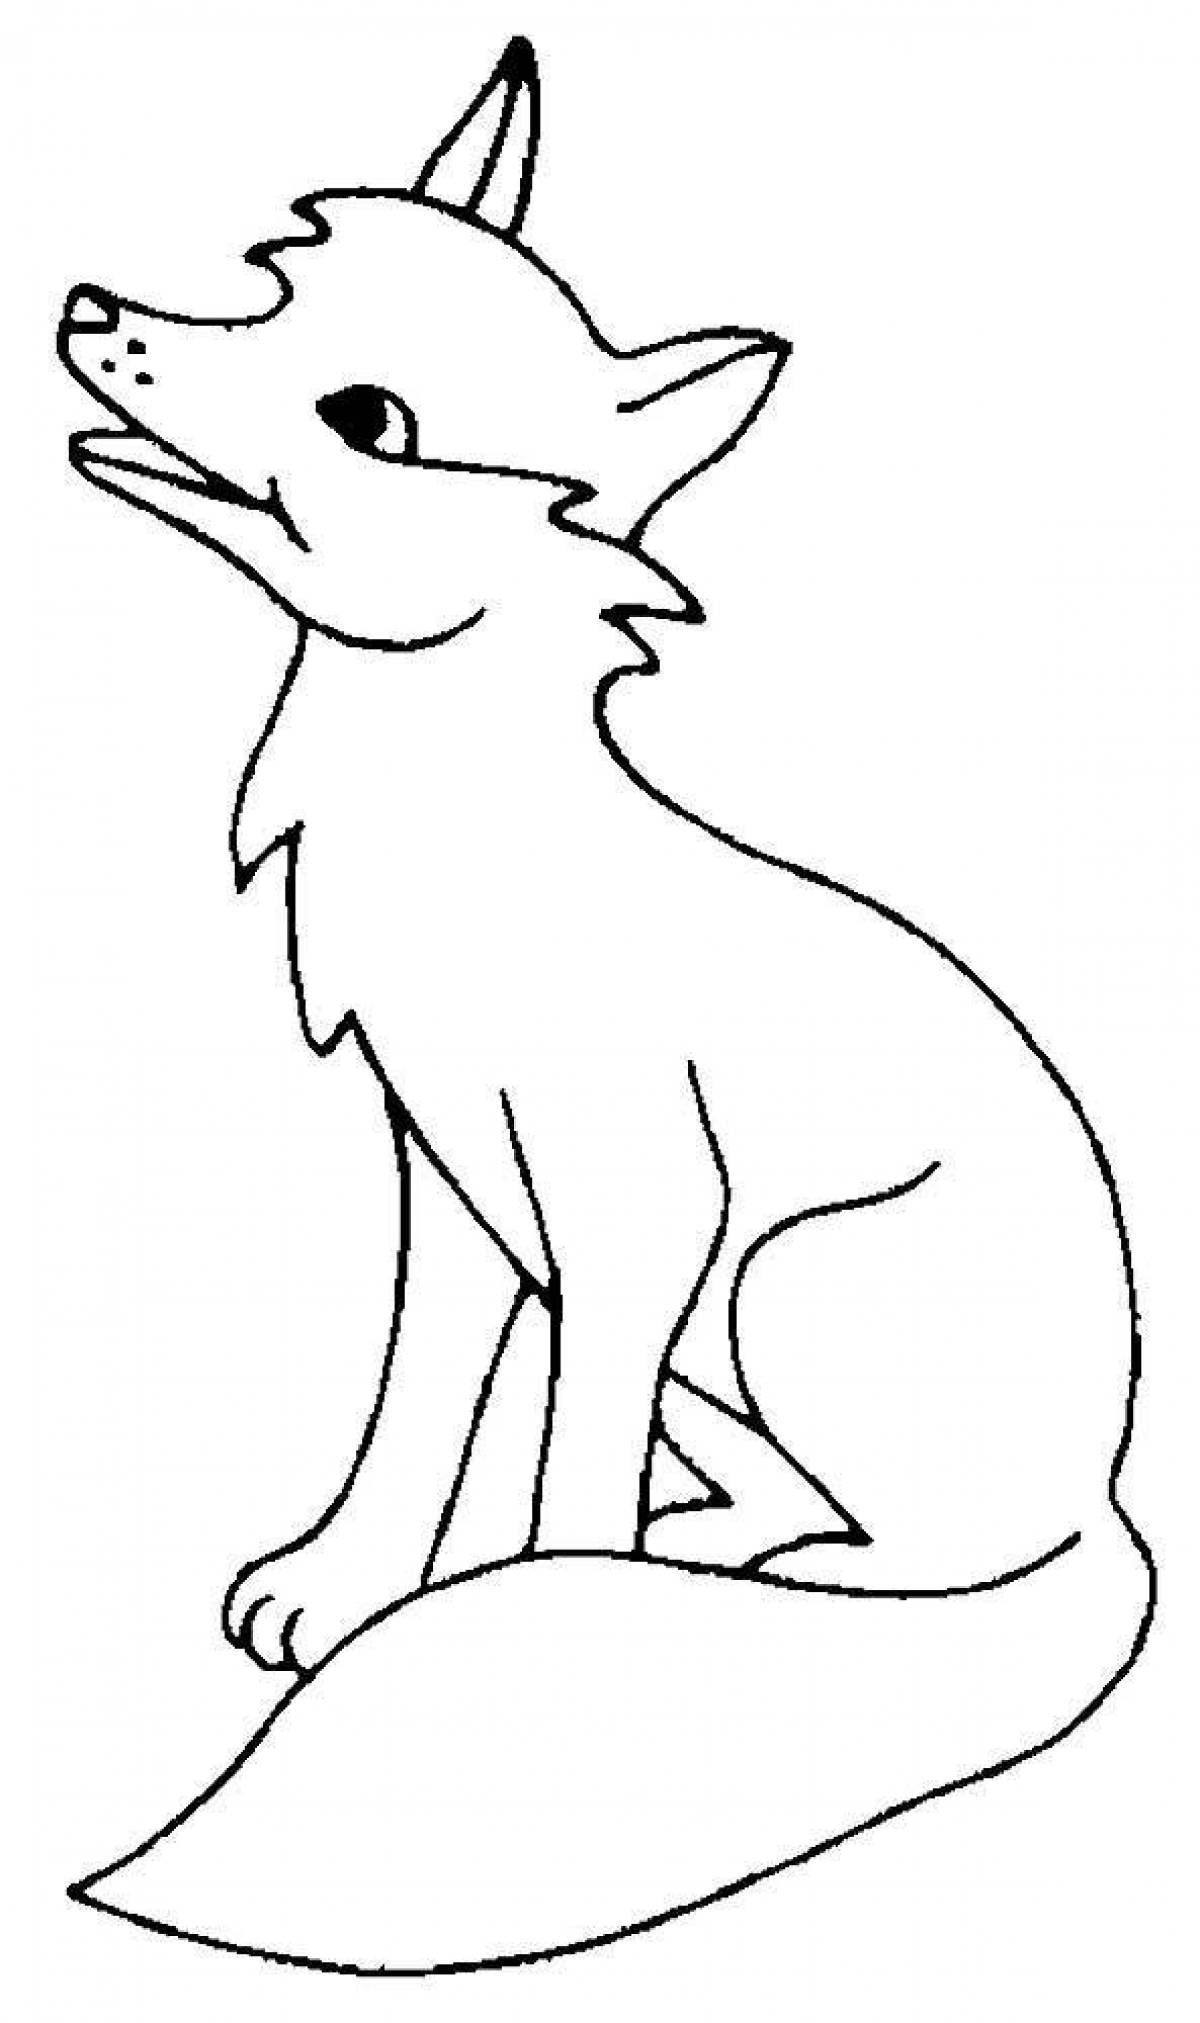 Animated crow and fox coloring page